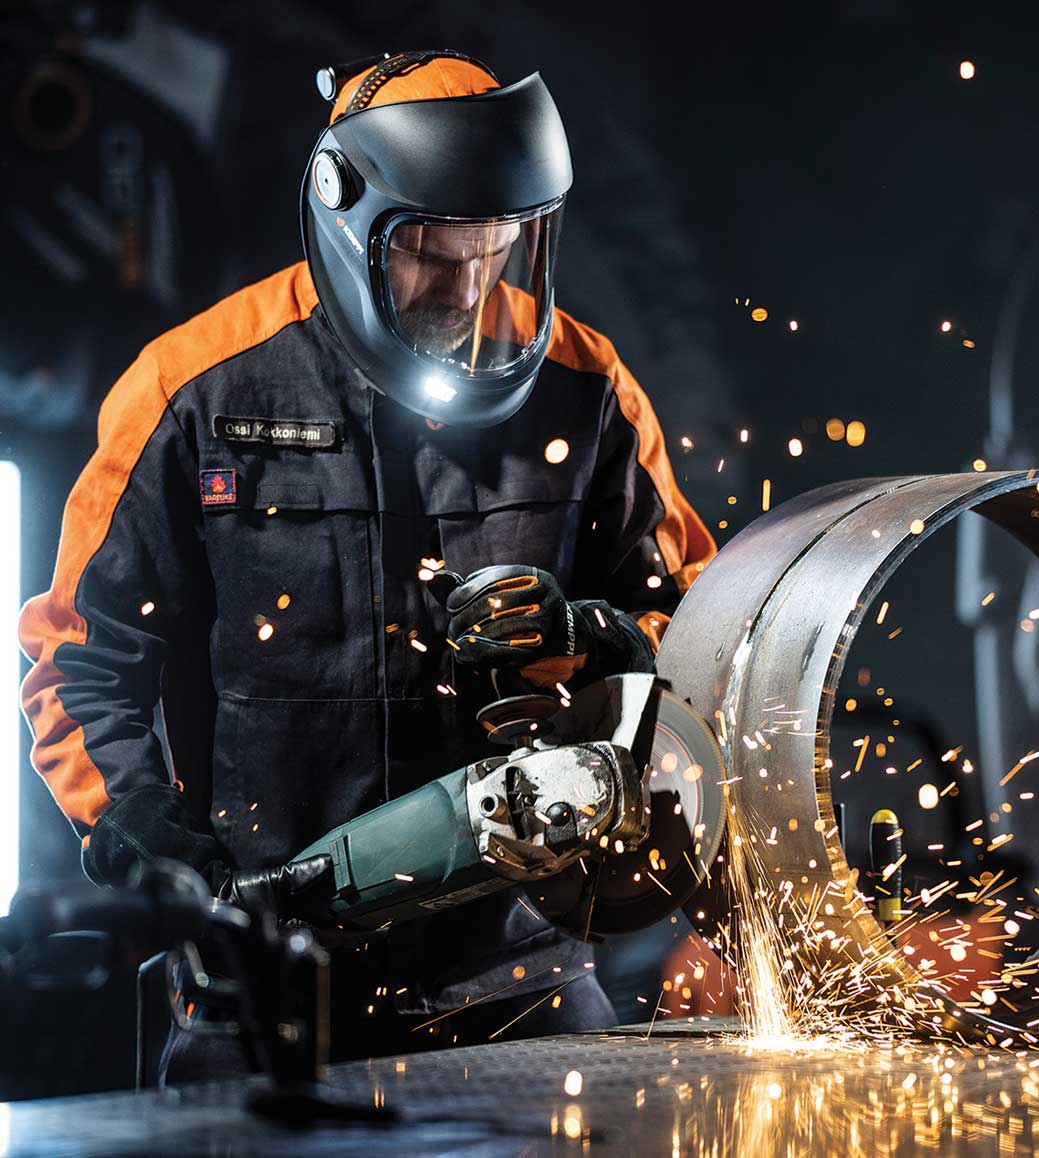 New era of full-face protection and visibility with Kemppi’s Zeta welding and grinding helmets